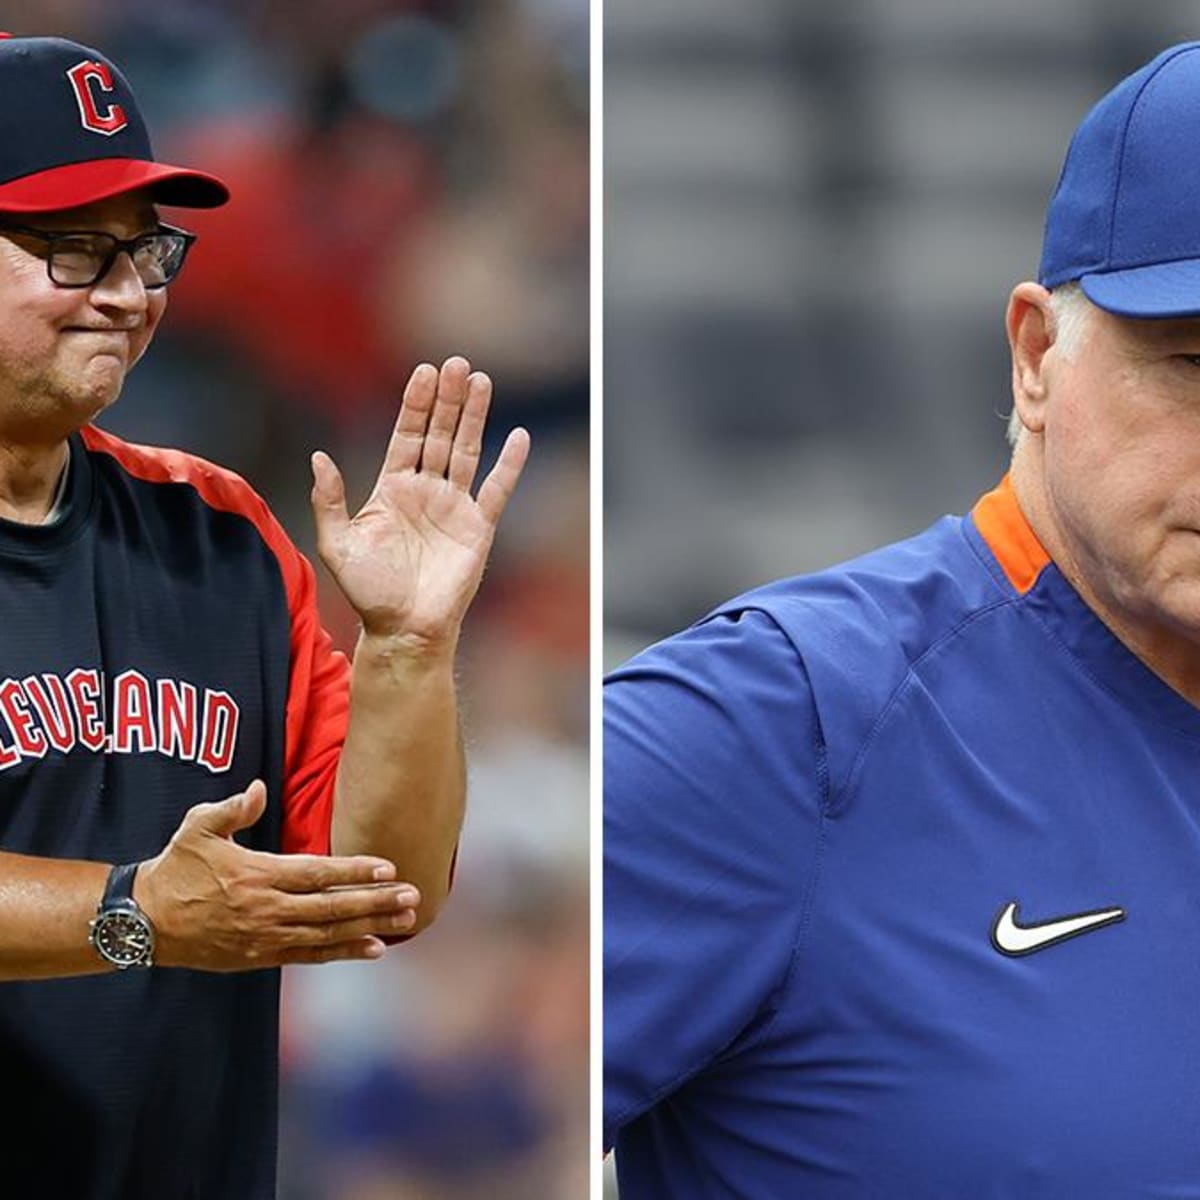 Terry Francona, Buck Showalter named 2022's top managers